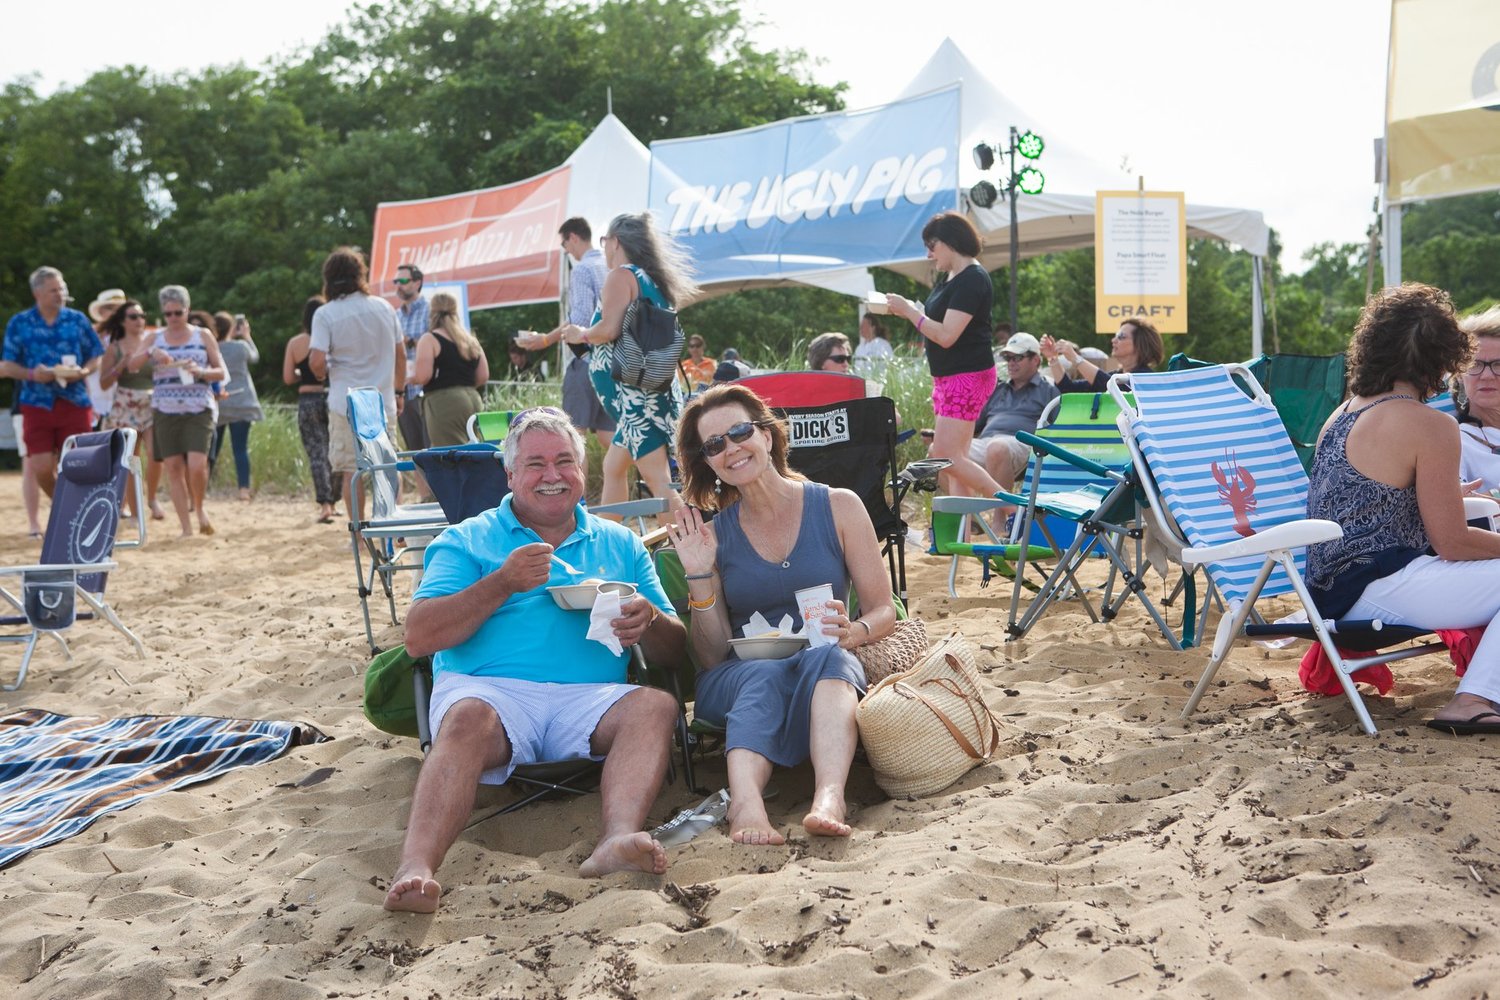 Bands in the Sand will come to the Philip Merrill Environmental Center in Annapolis on June 11.